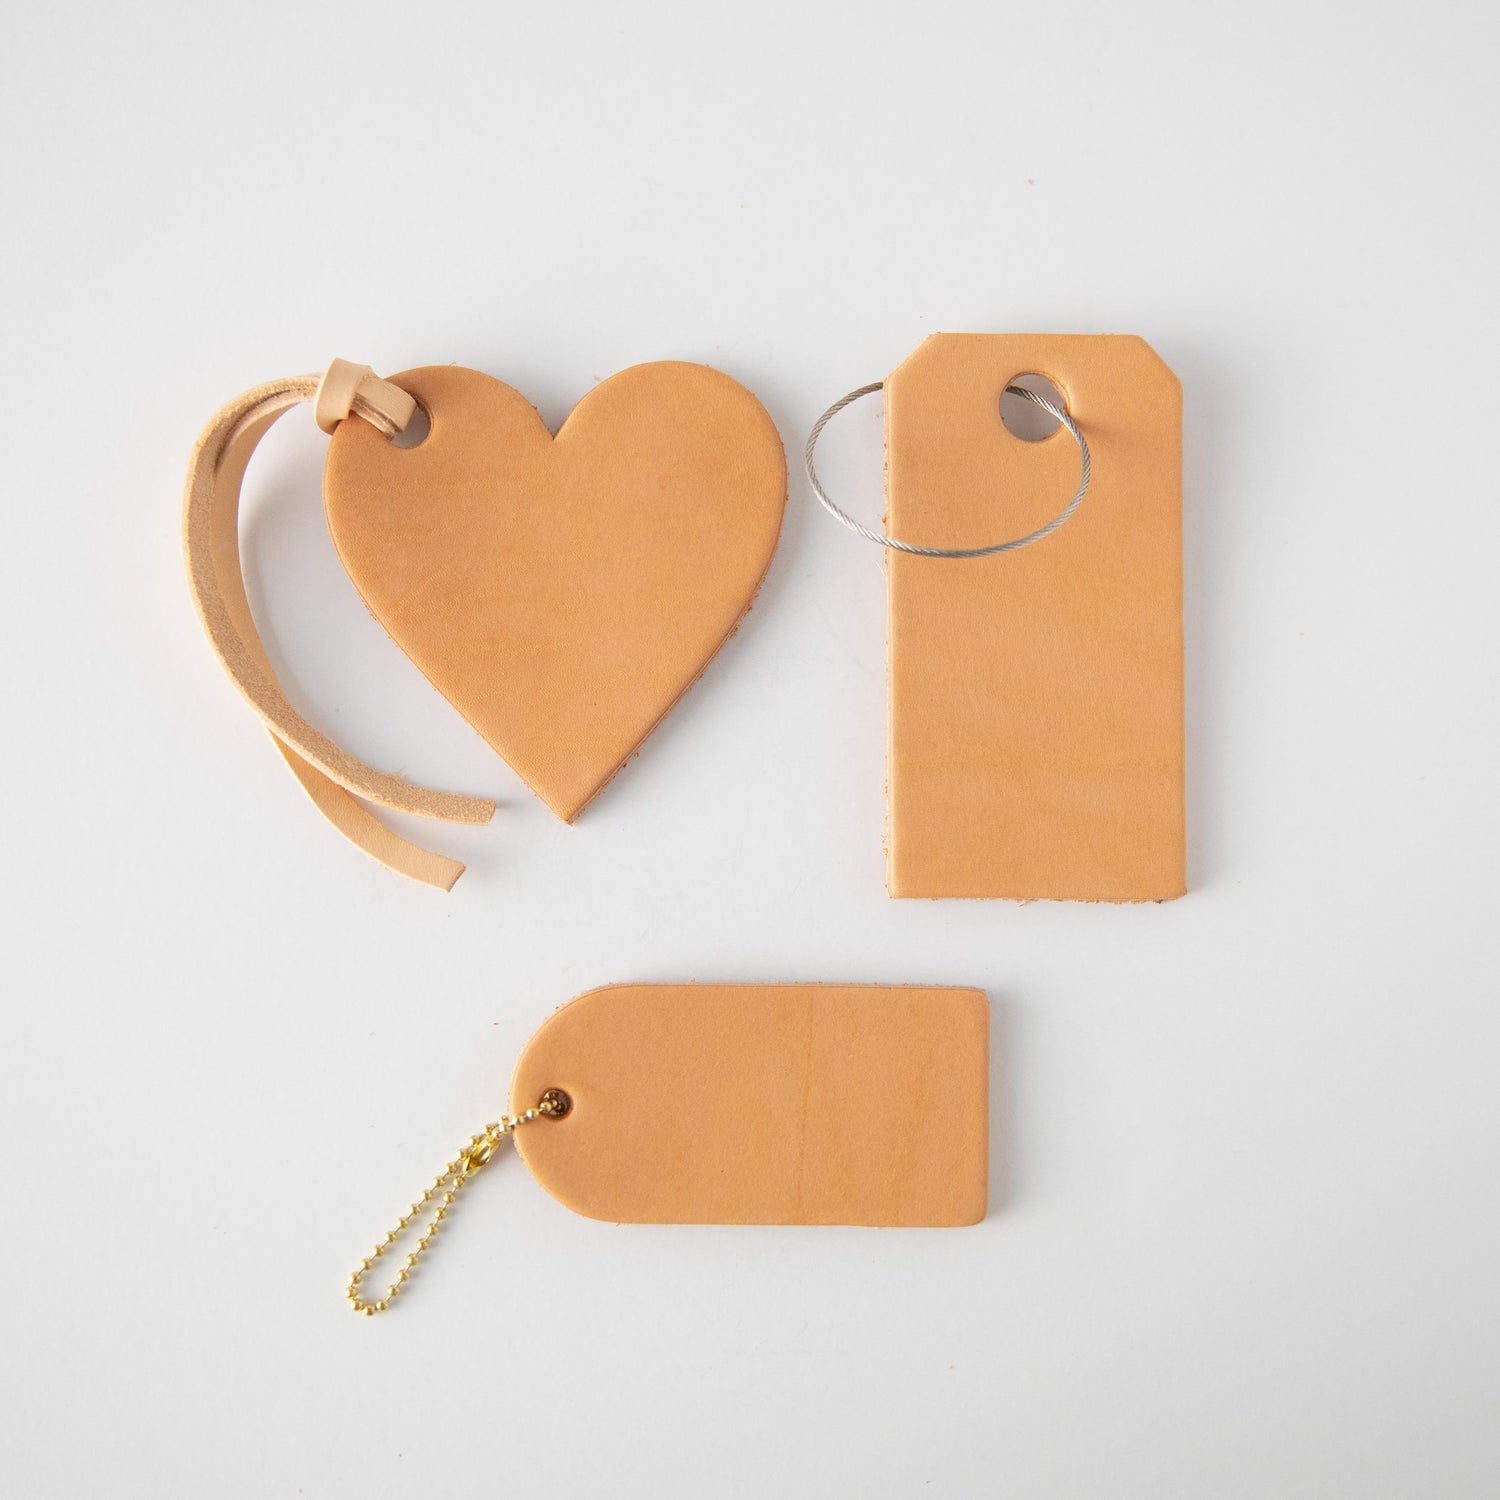 Tan Mini Leather Tag  Leather luggage tags handmade by KMM & Co.